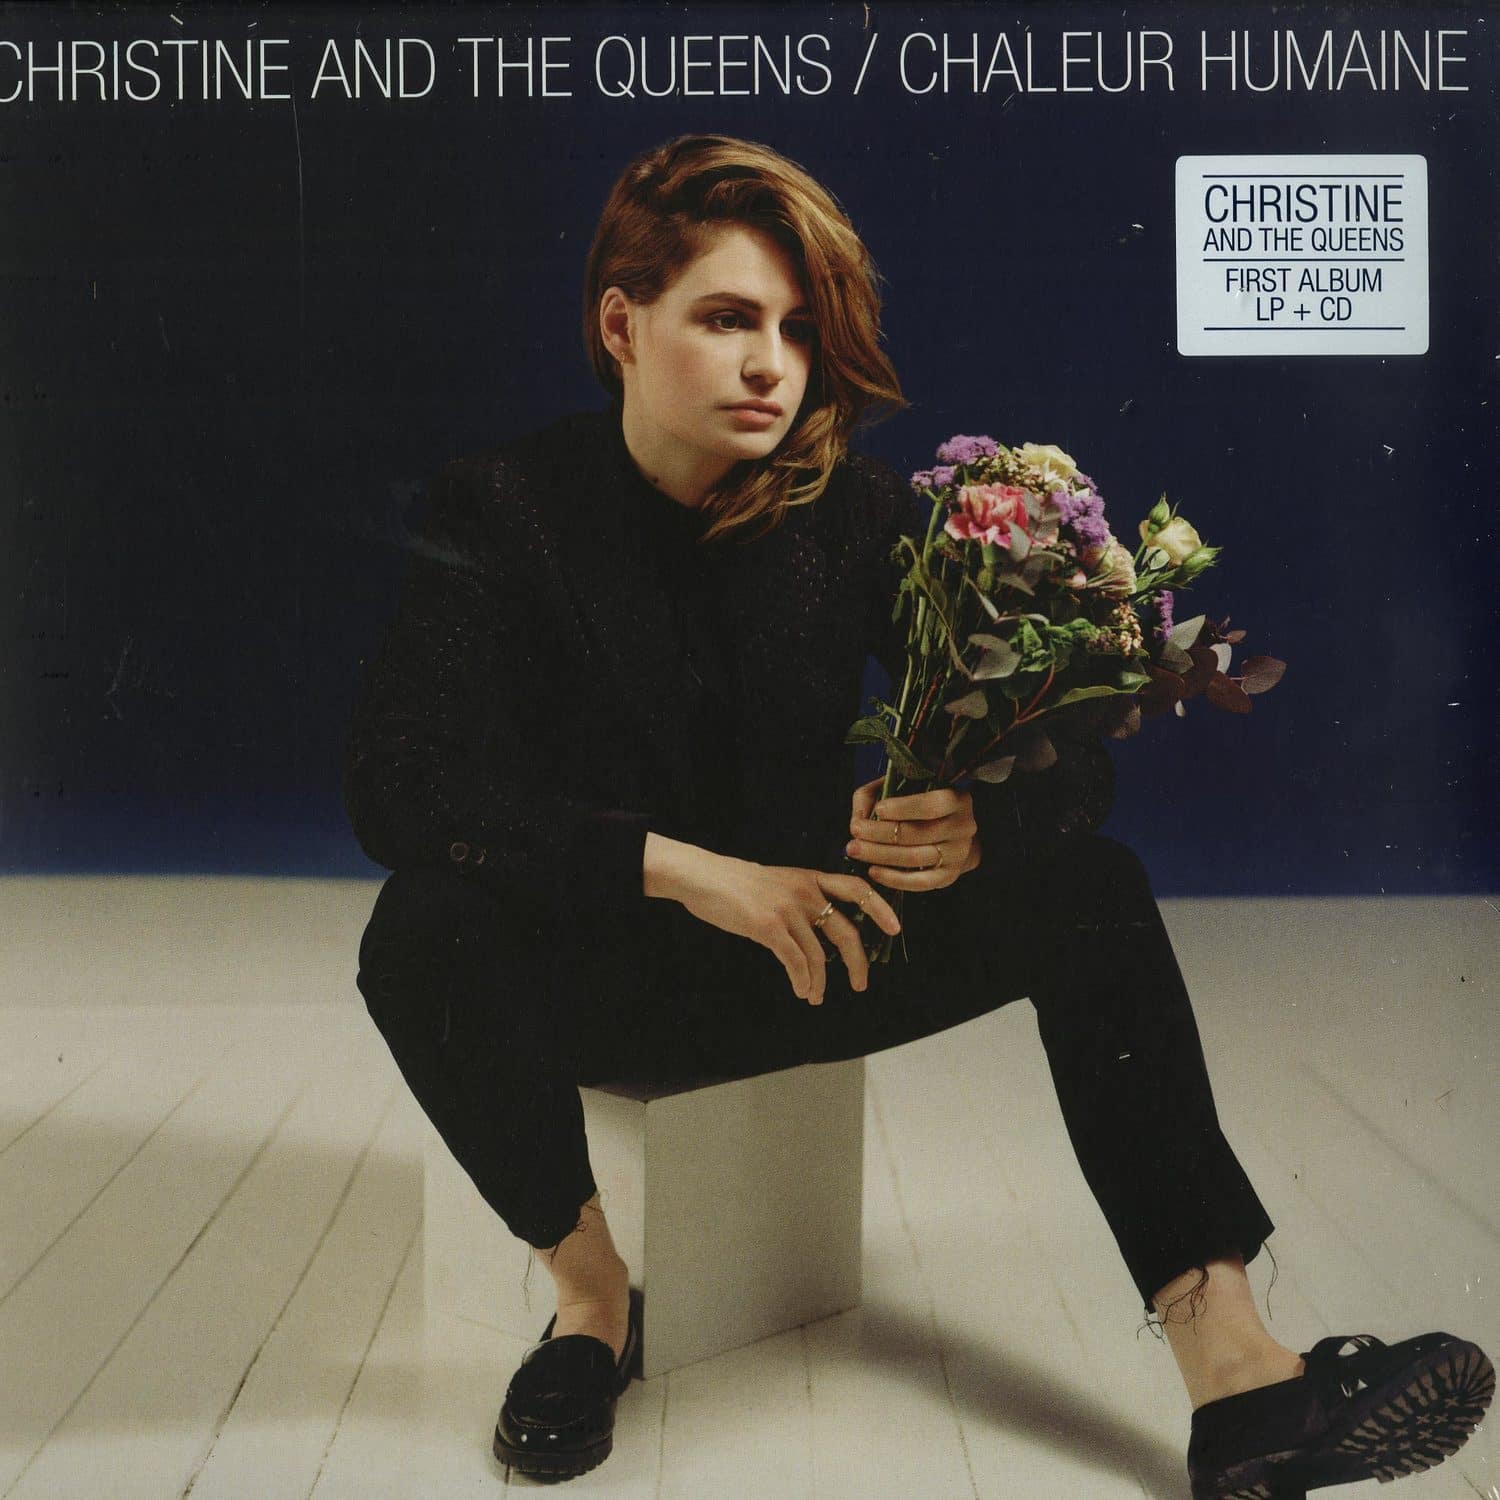 Christine And The Queens - CHALEUR HUMAINE 